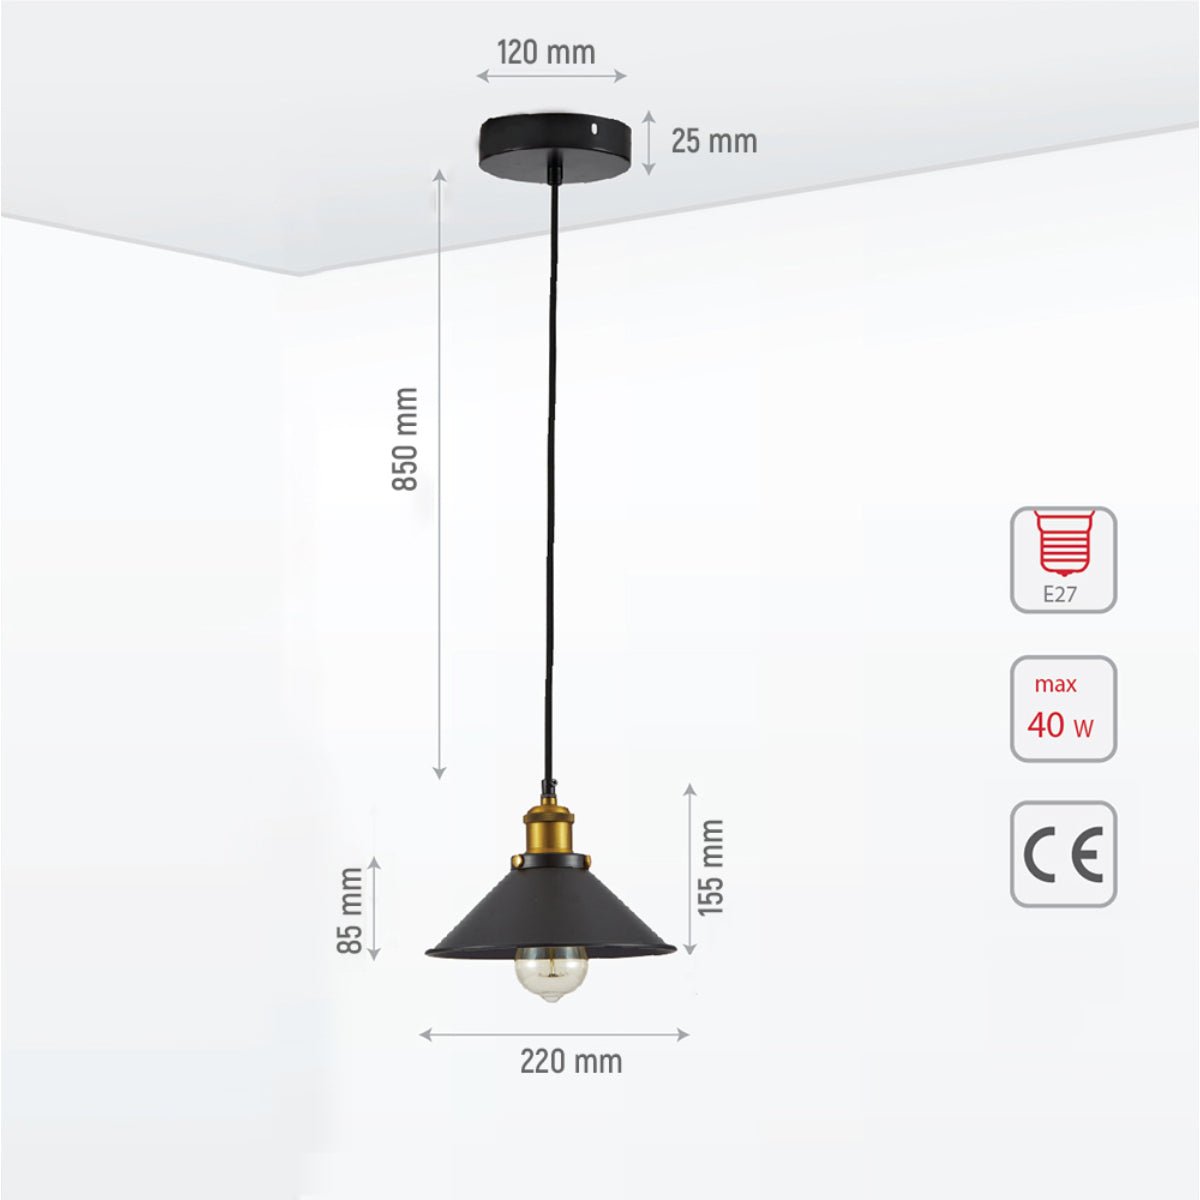 Size and specs of Black Metal Small Funnel Pendant Ceiling Light with E27 | TEKLED 150-17862